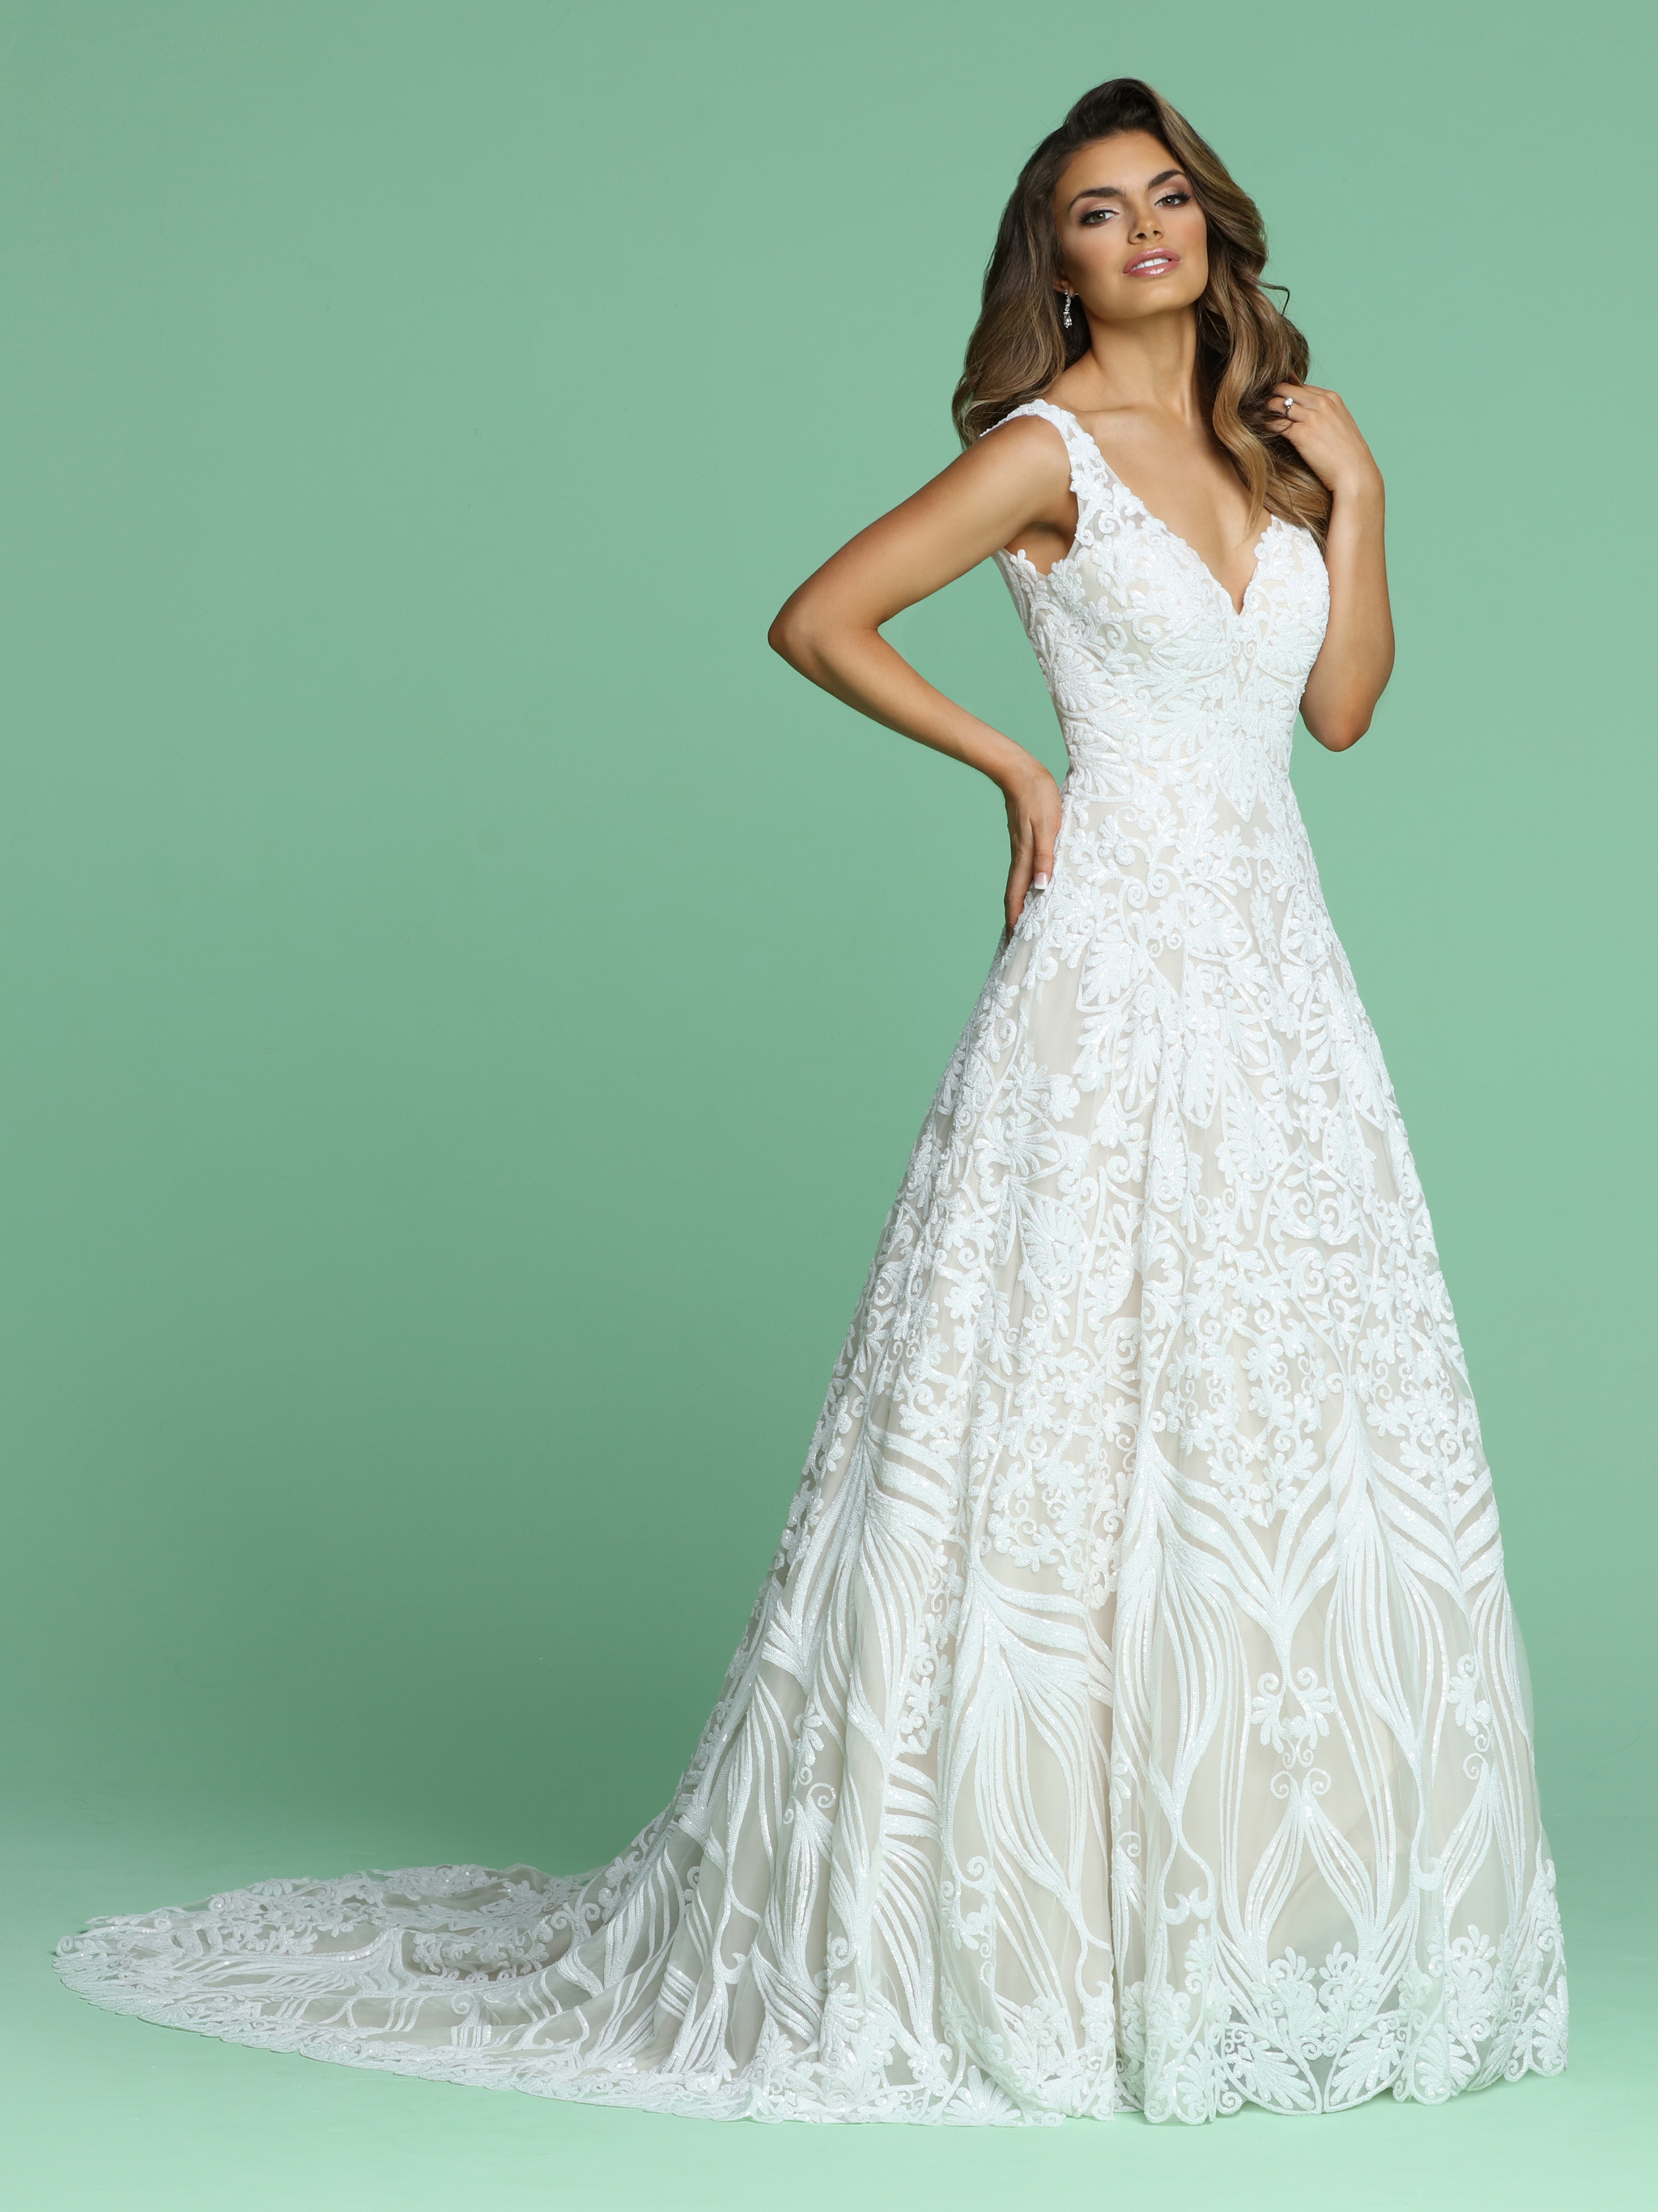 How to Choose Wedding Dress Styles for Different Body Types